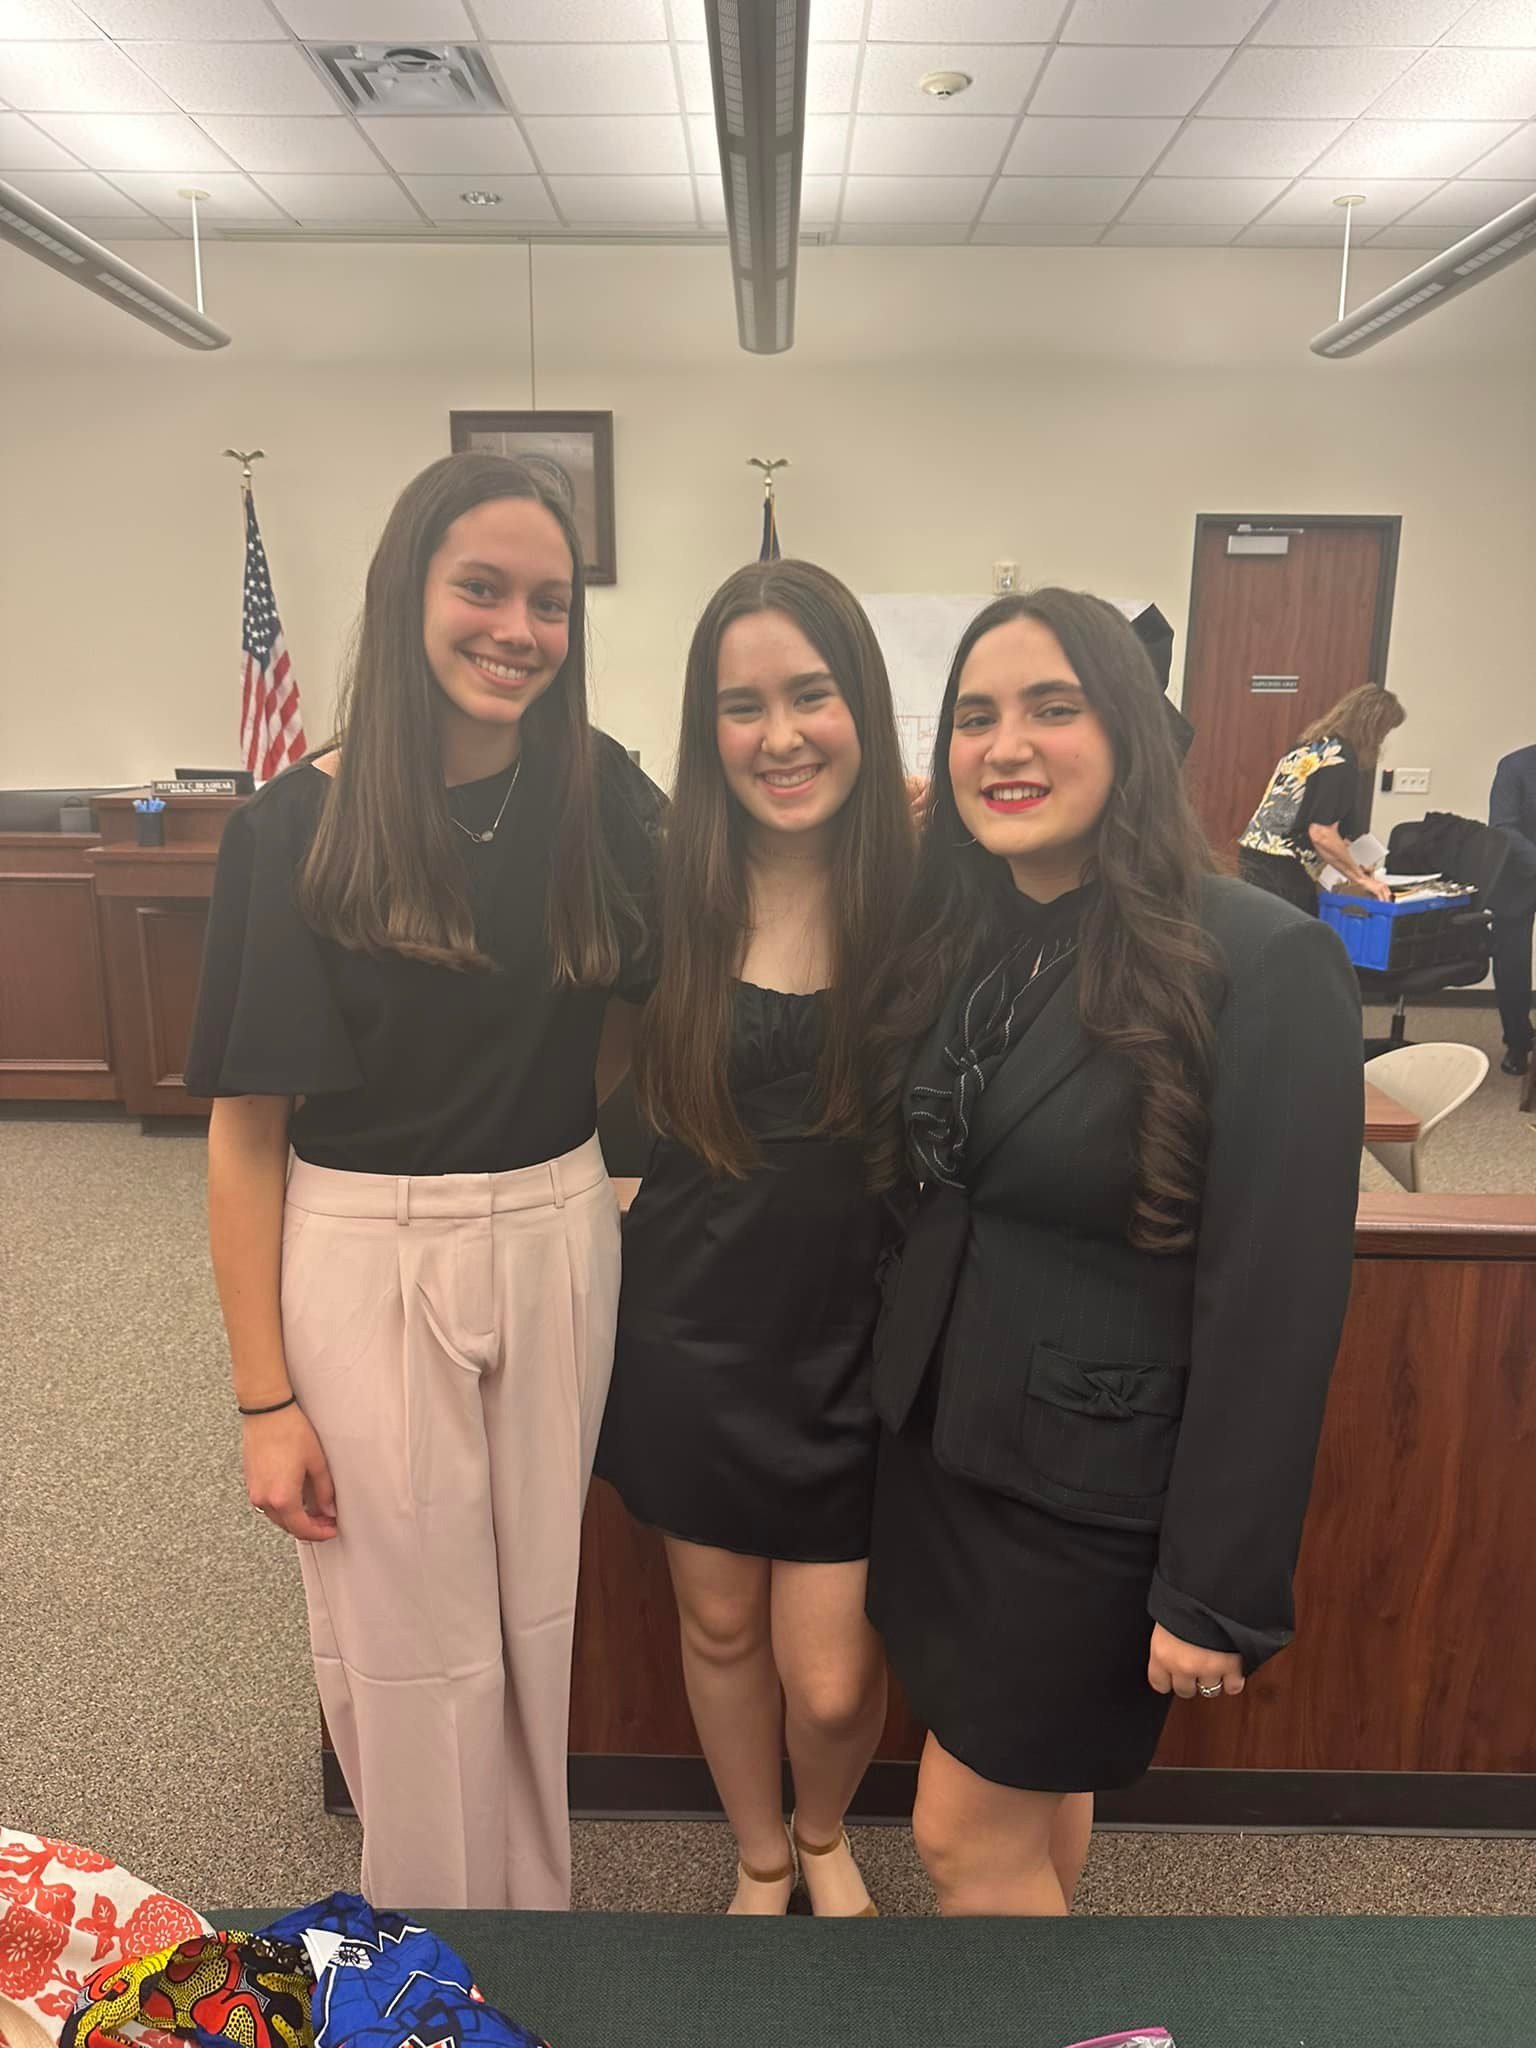 Emma and friends competed in Mock trial today and won! My girl was amazing! So proud.